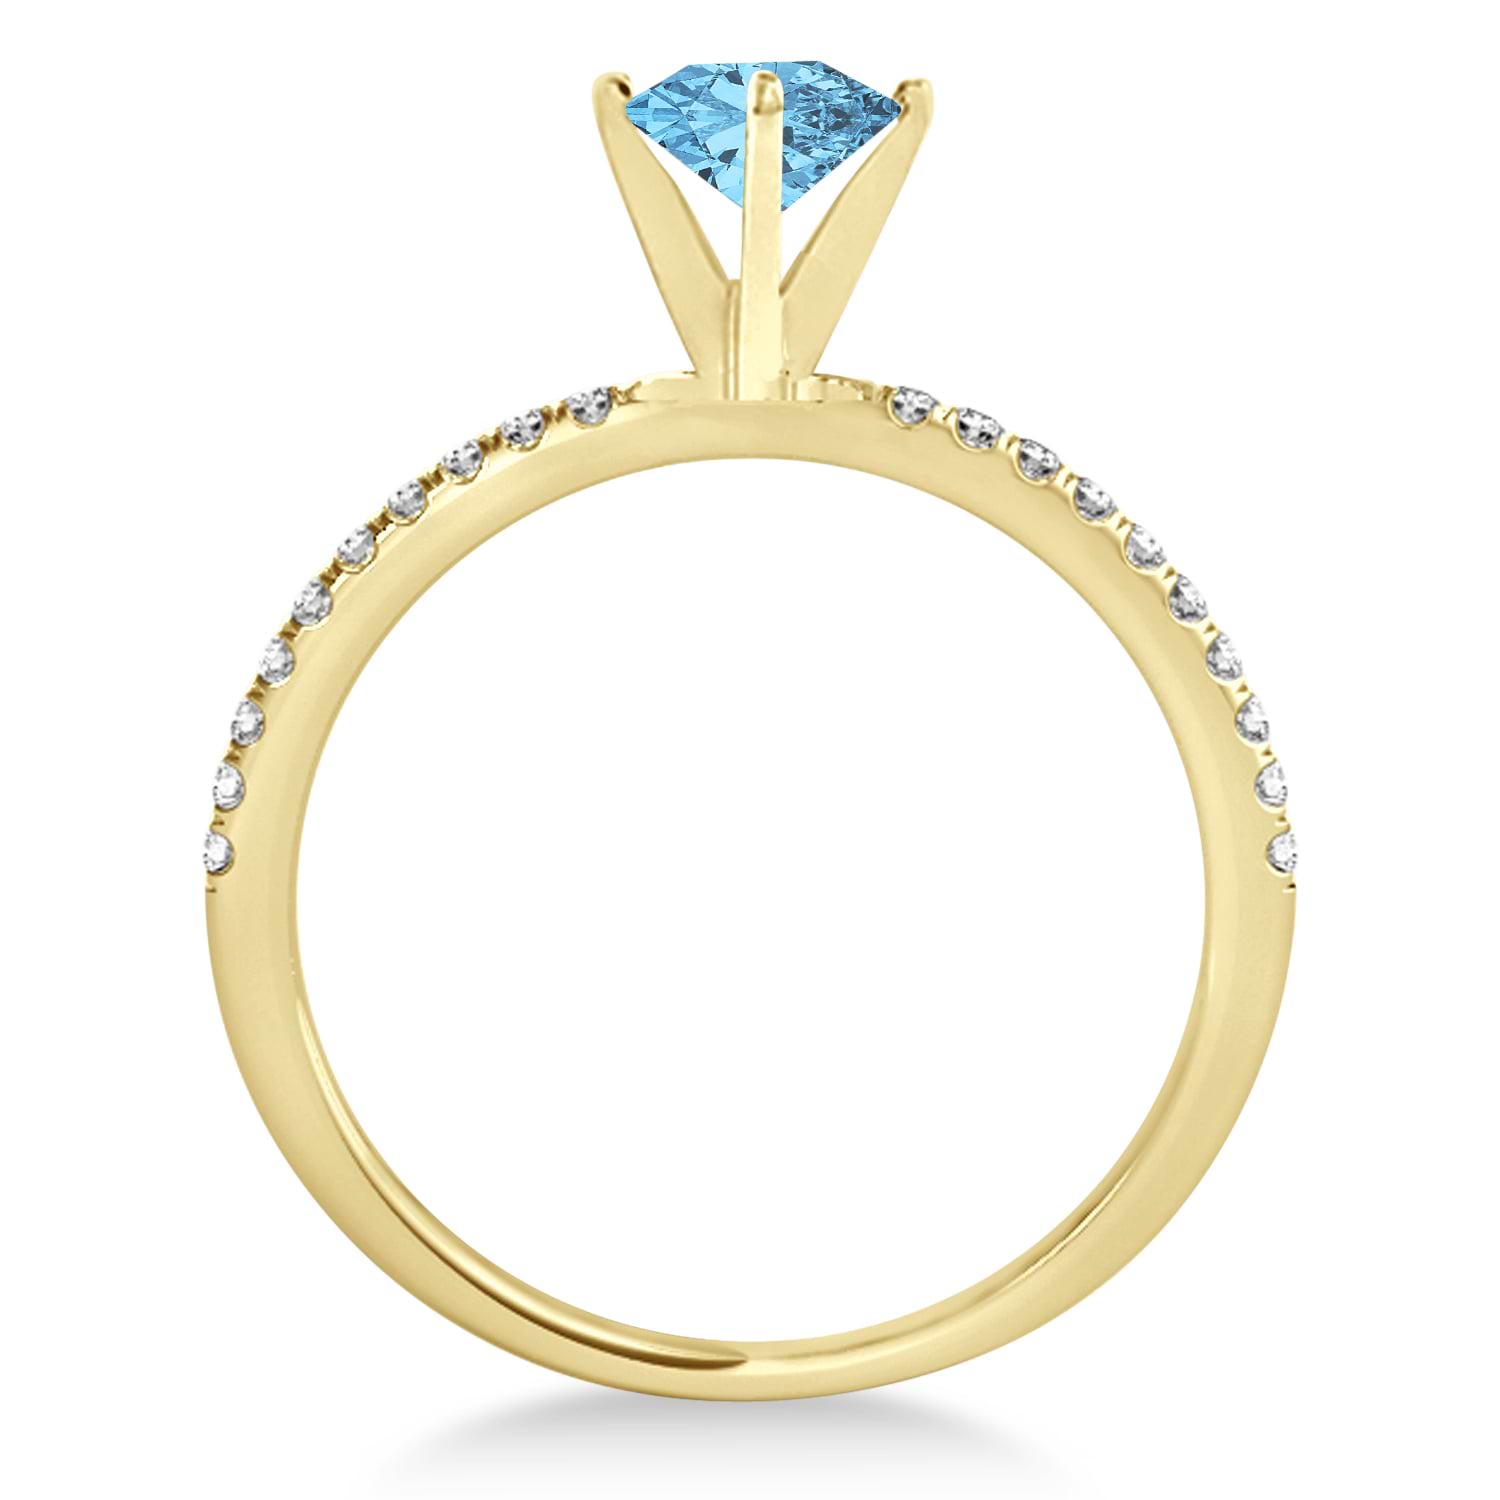 Blue Topaz & Diamond Accented Oval Shape Engagement Ring 18k Yellow Gold (2.50ct)